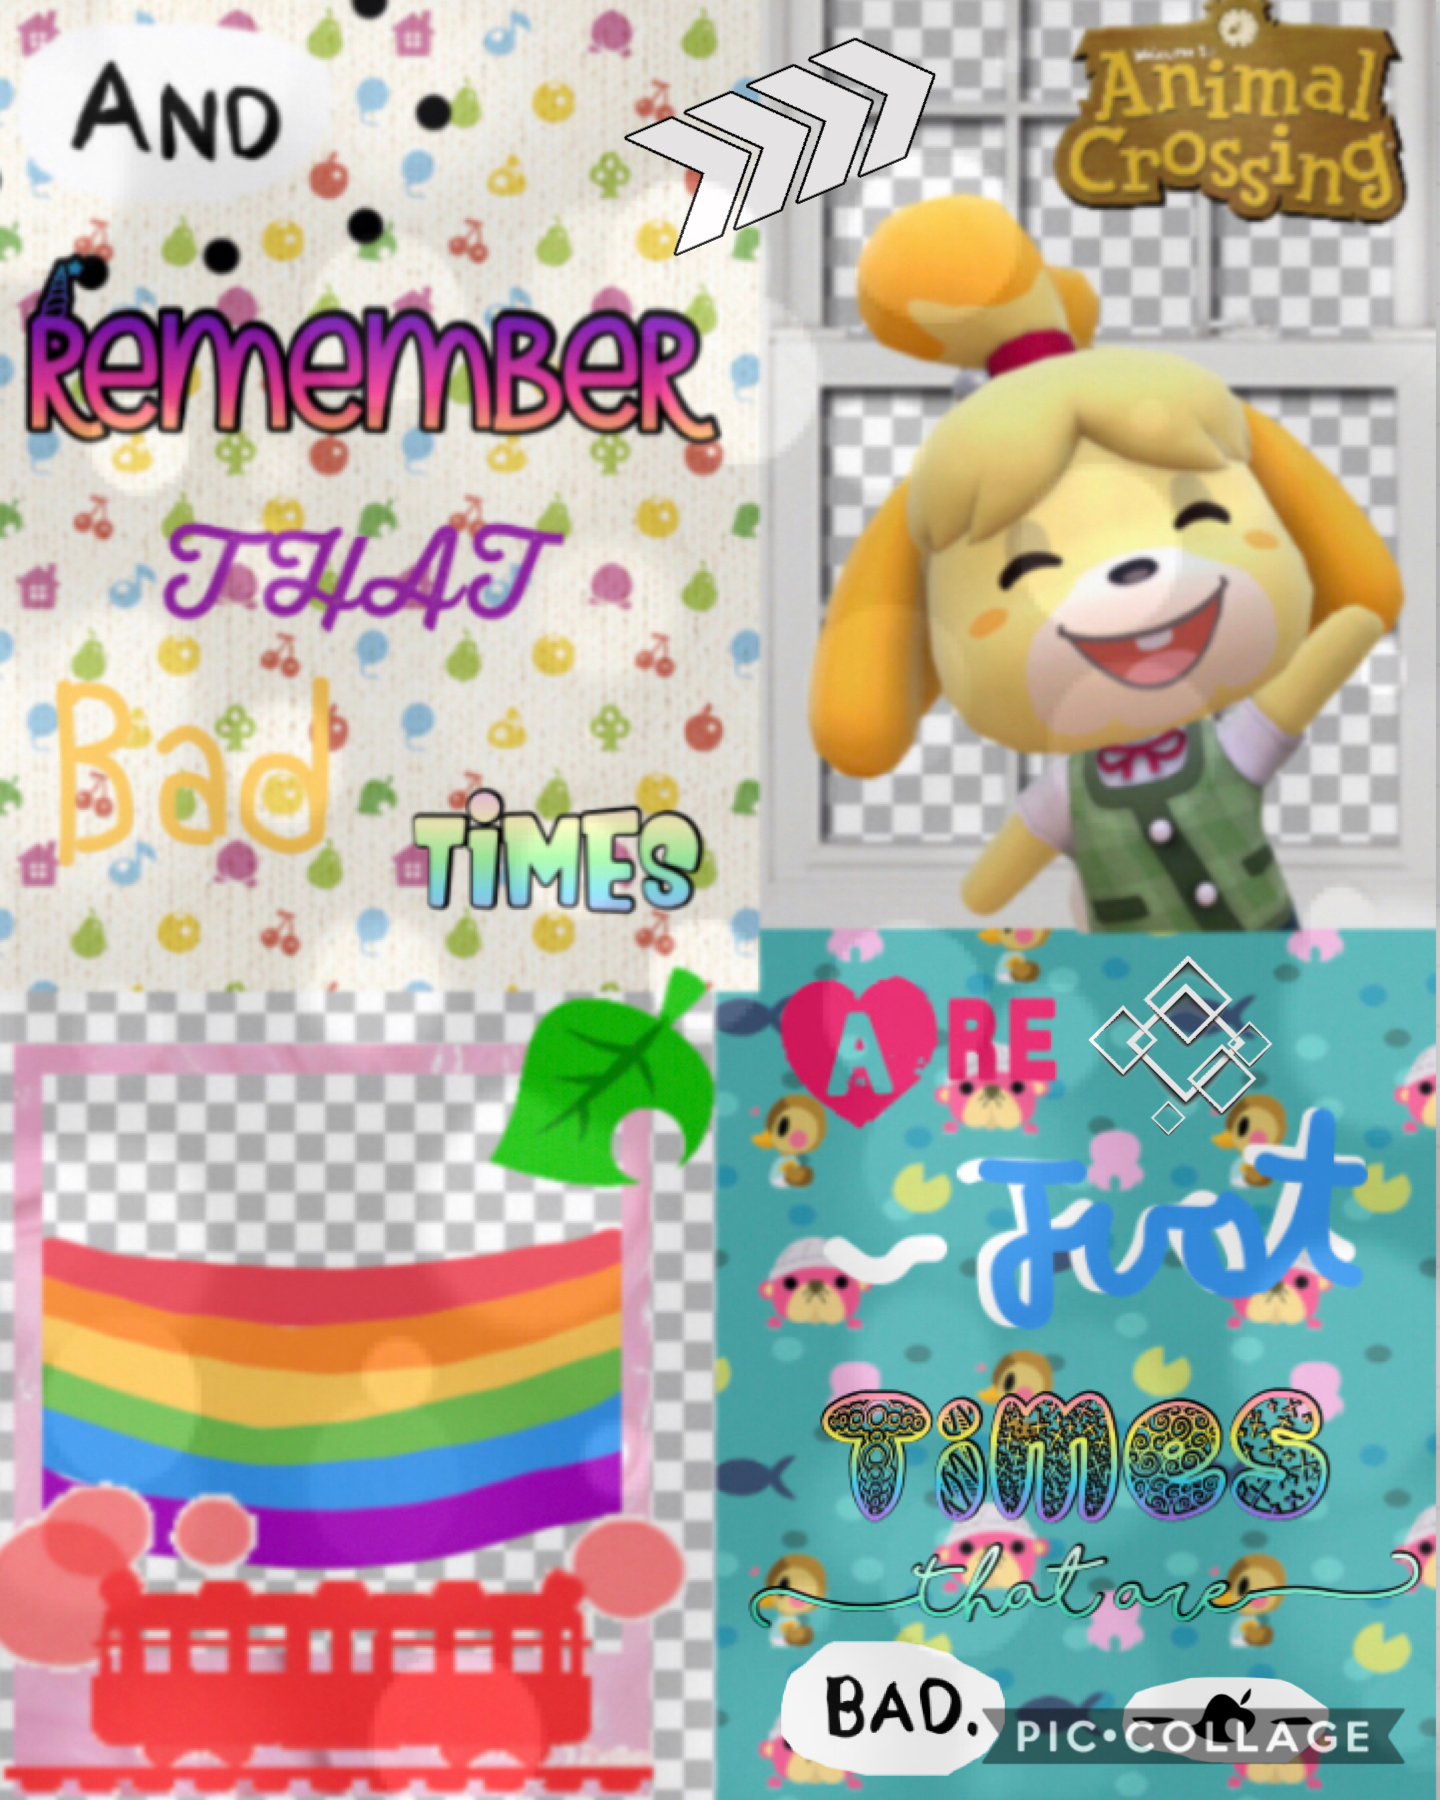 Tap 🐶🐼🐱
Another animal crossing collage because I got a request from someone to make collages about my life or things I like so here is ANIMAL CROSSING❤️ anyway ily 🤟🏻 and peace out ✌🏻 